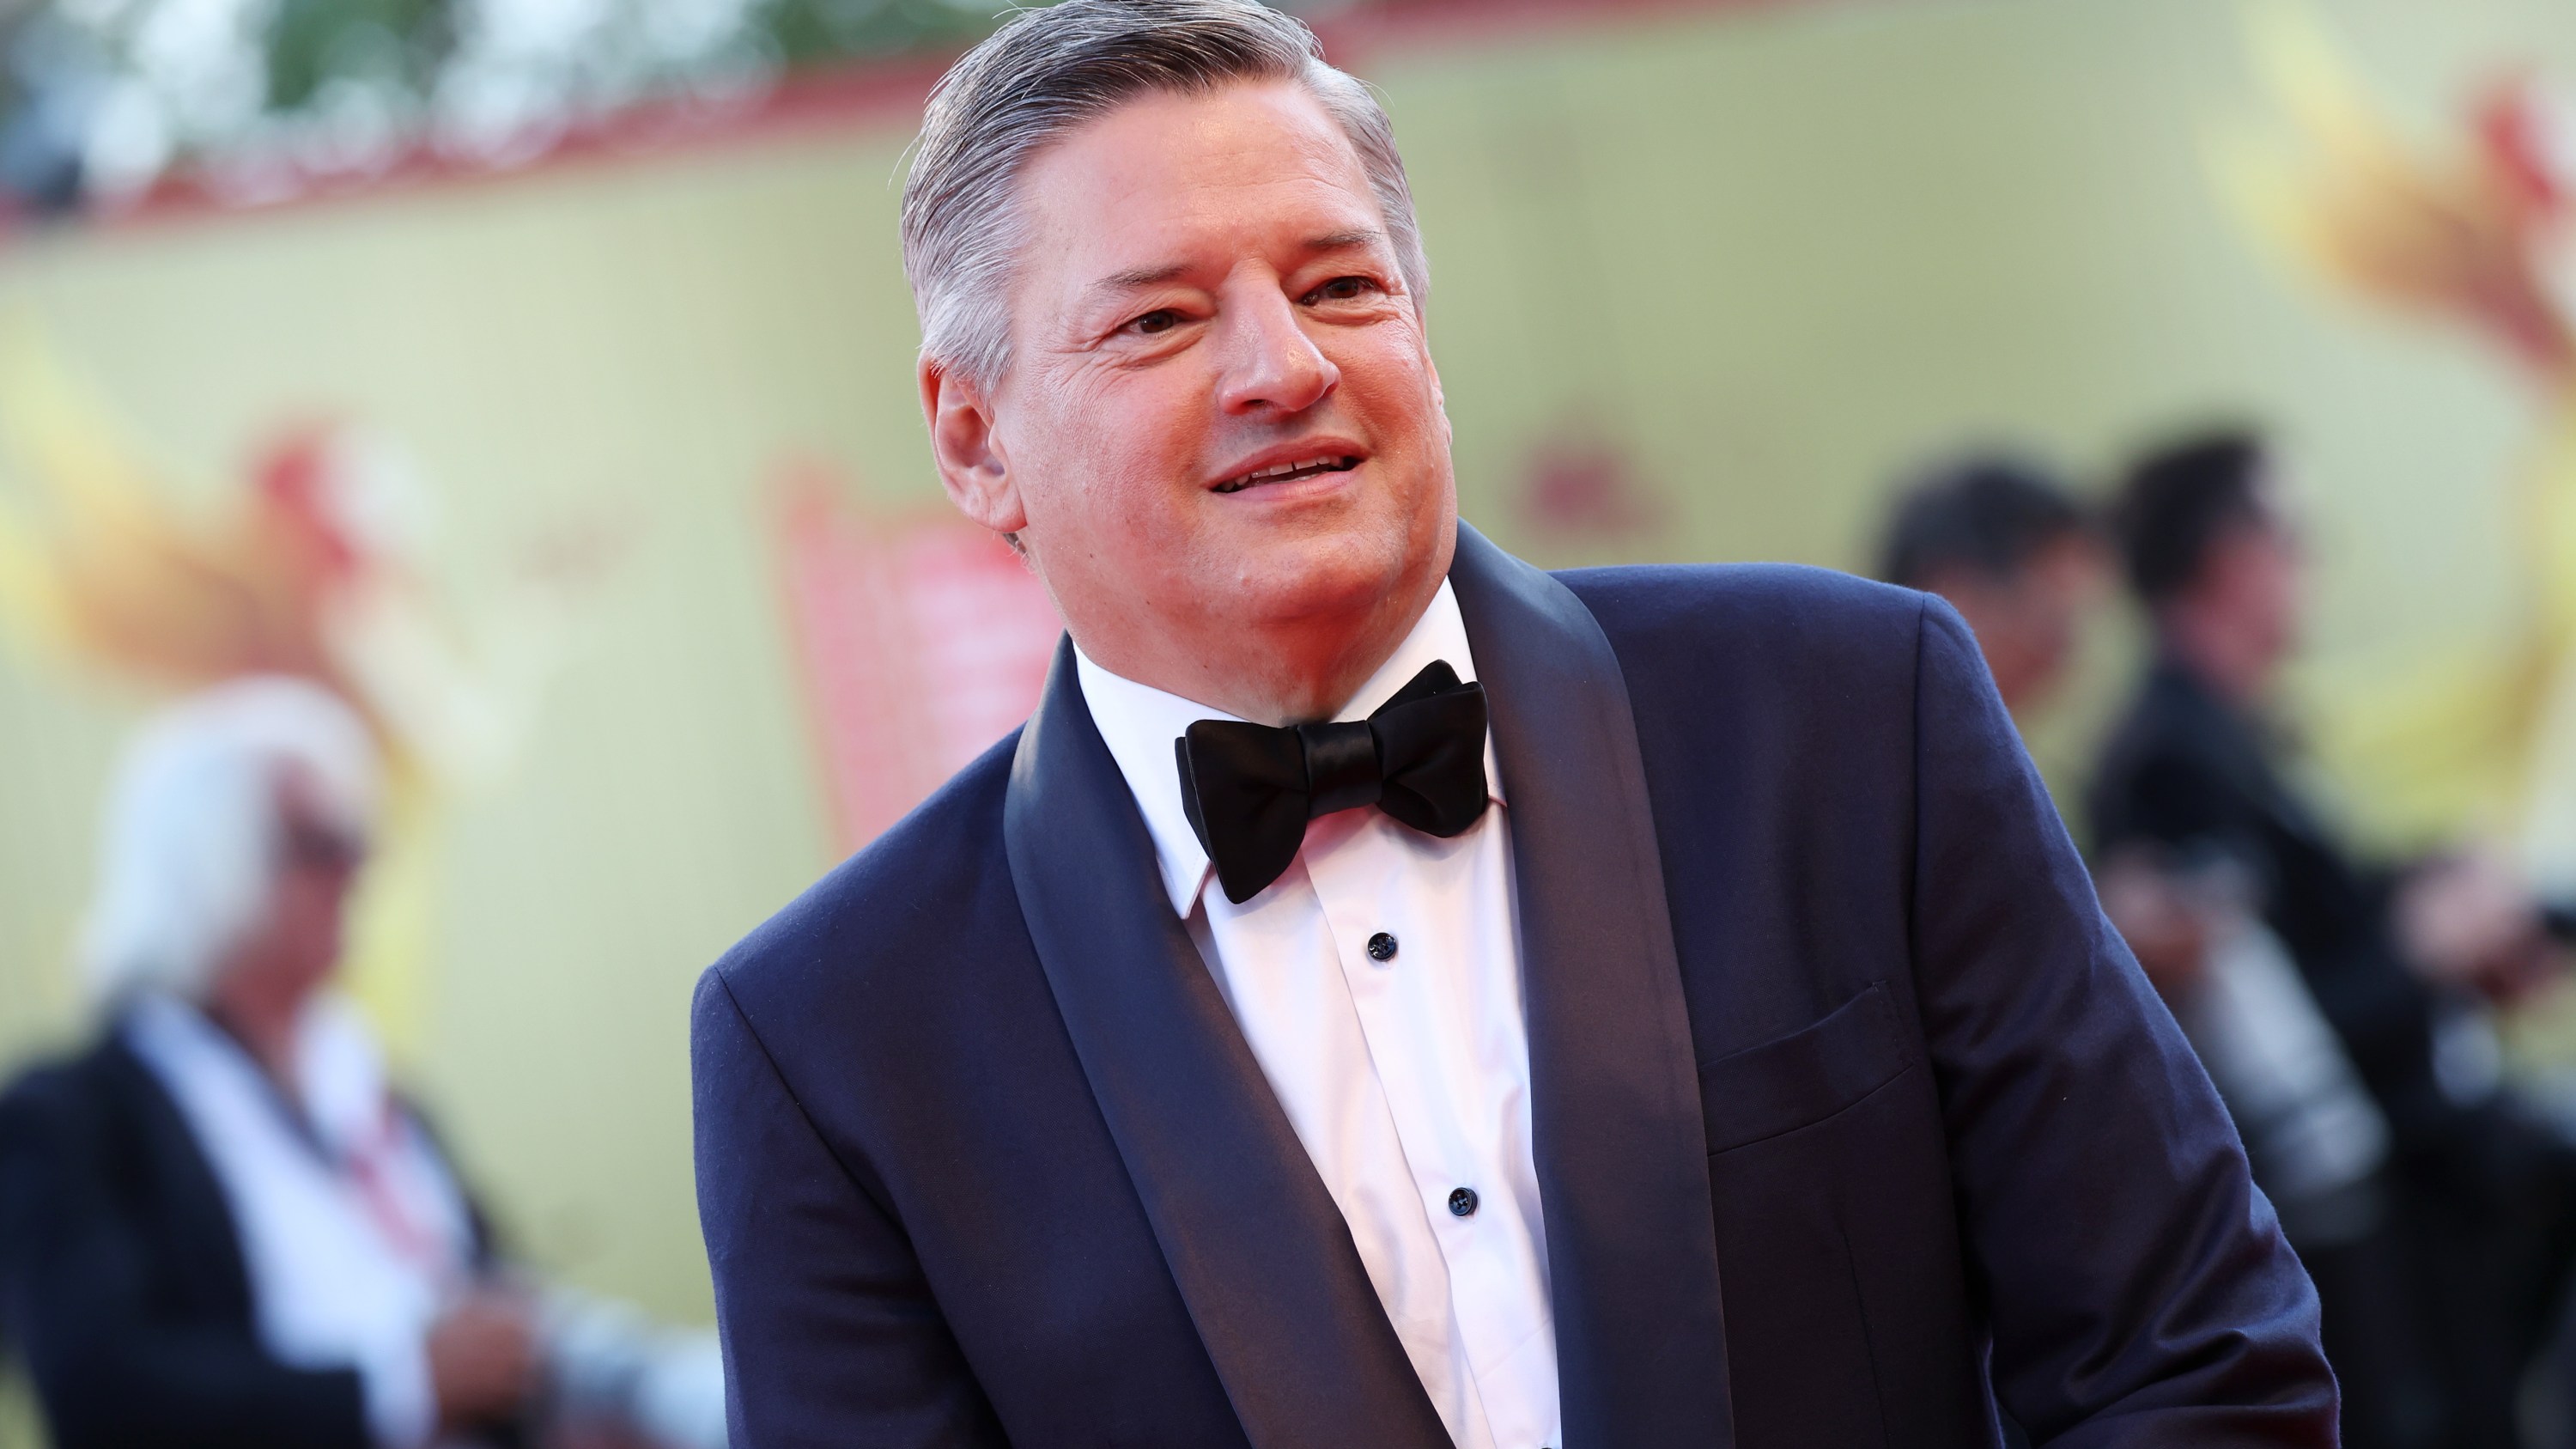 VENICE, ITALY - AUGUST 31: Ted Sarandos attends the "White Noise" and opening ceremony red carpet at the 79th Venice International Film Festival on August 31, 2022 in Venice, Italy. (Photo by Vittorio Zunino Celotto/Getty Images)